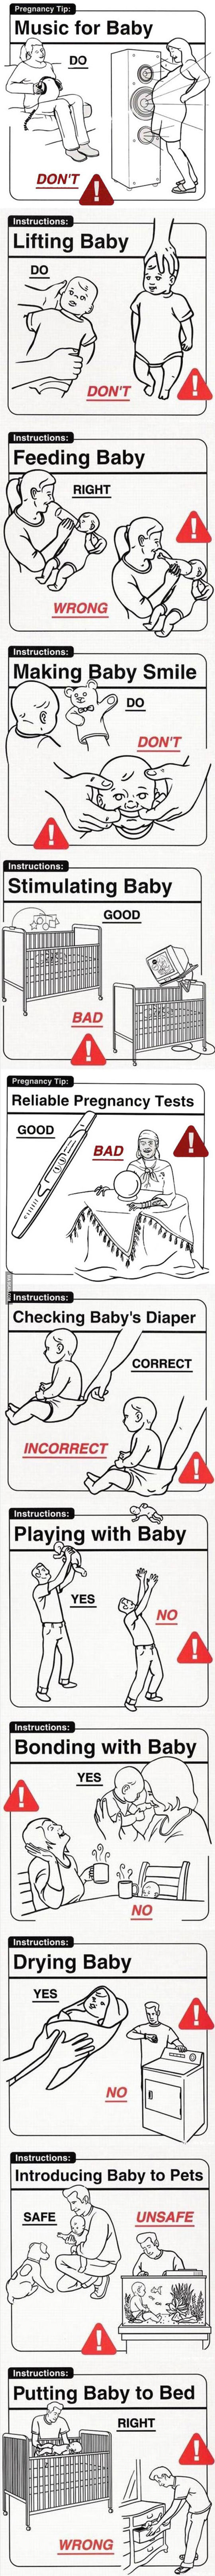 cool-baby-do-dont-illustration-bed-diaper